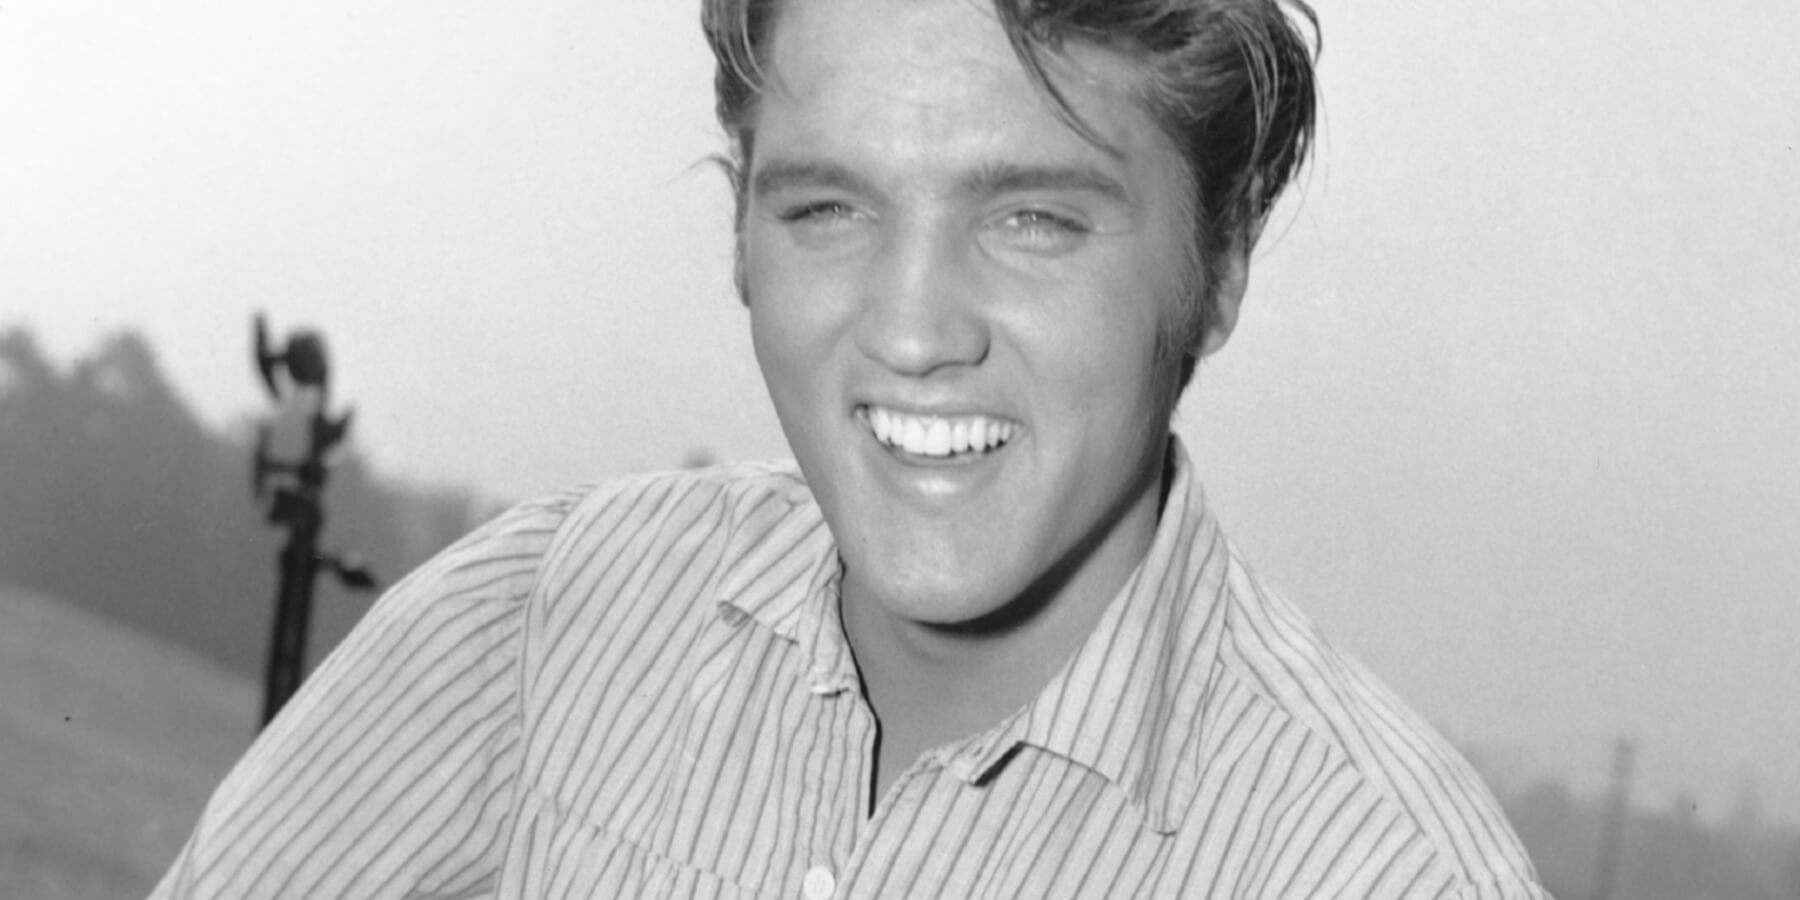 Elvis Presely photographed in August 1956 at the 20th Century Fox Ranch, Malibu Creek State Park, California.